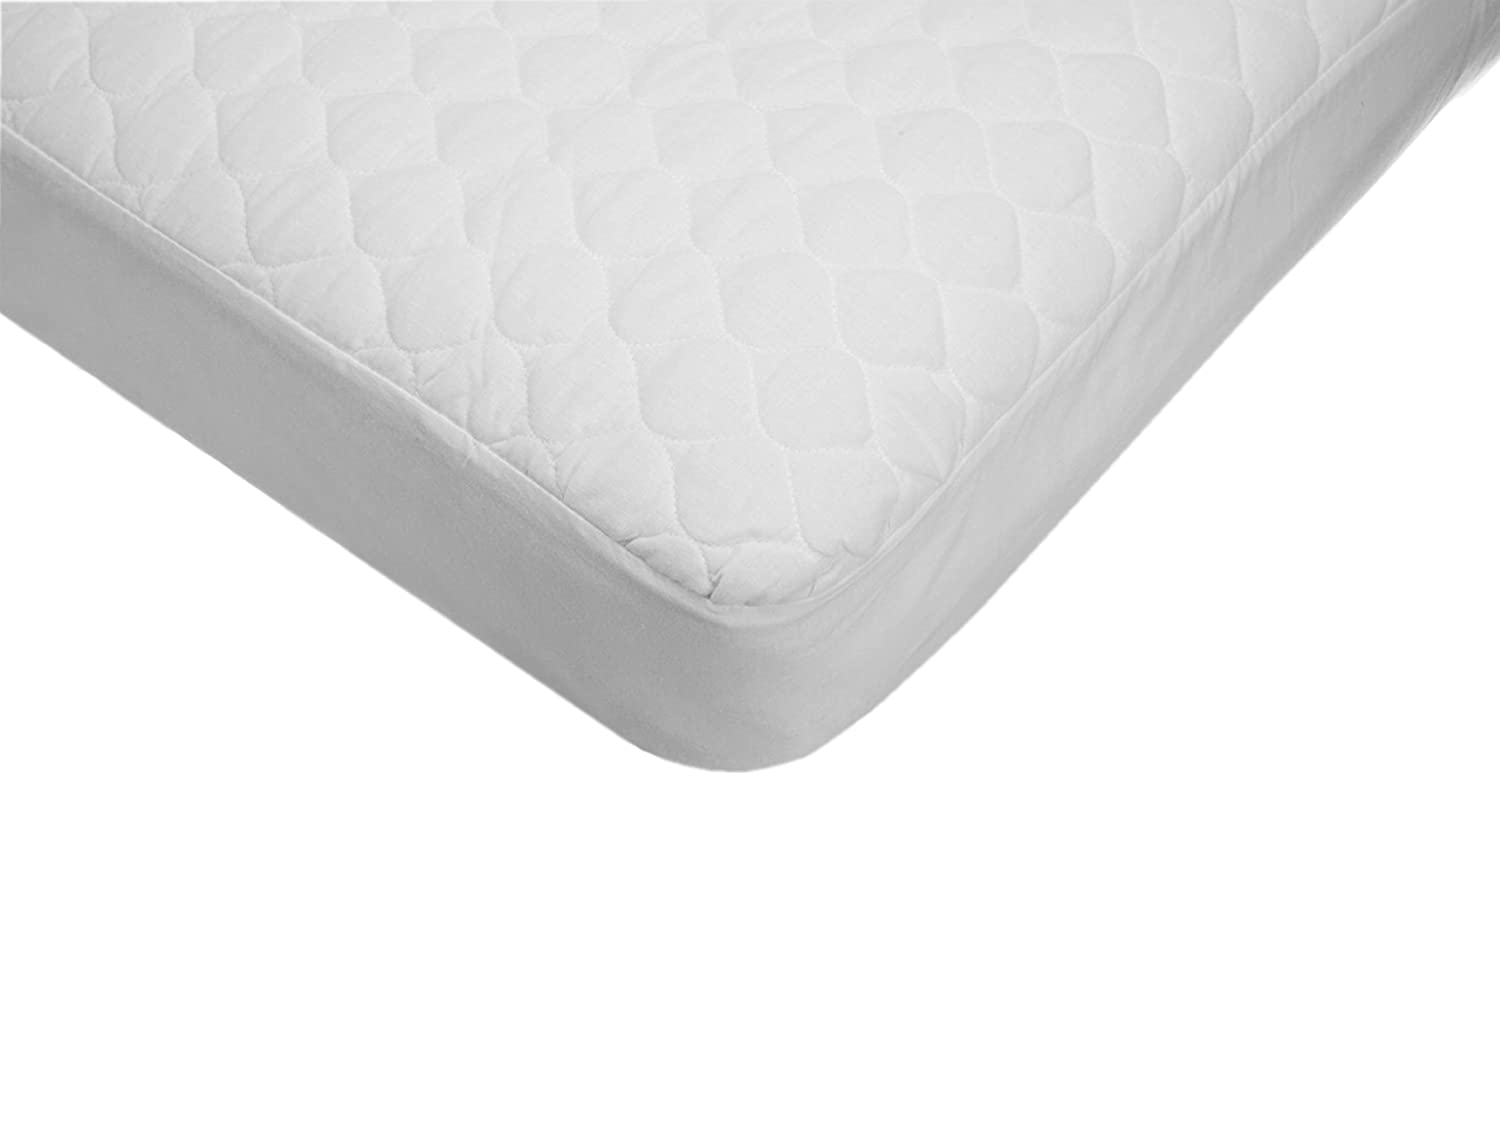 kidiway quilted cotton waterproof crib mattress cover white